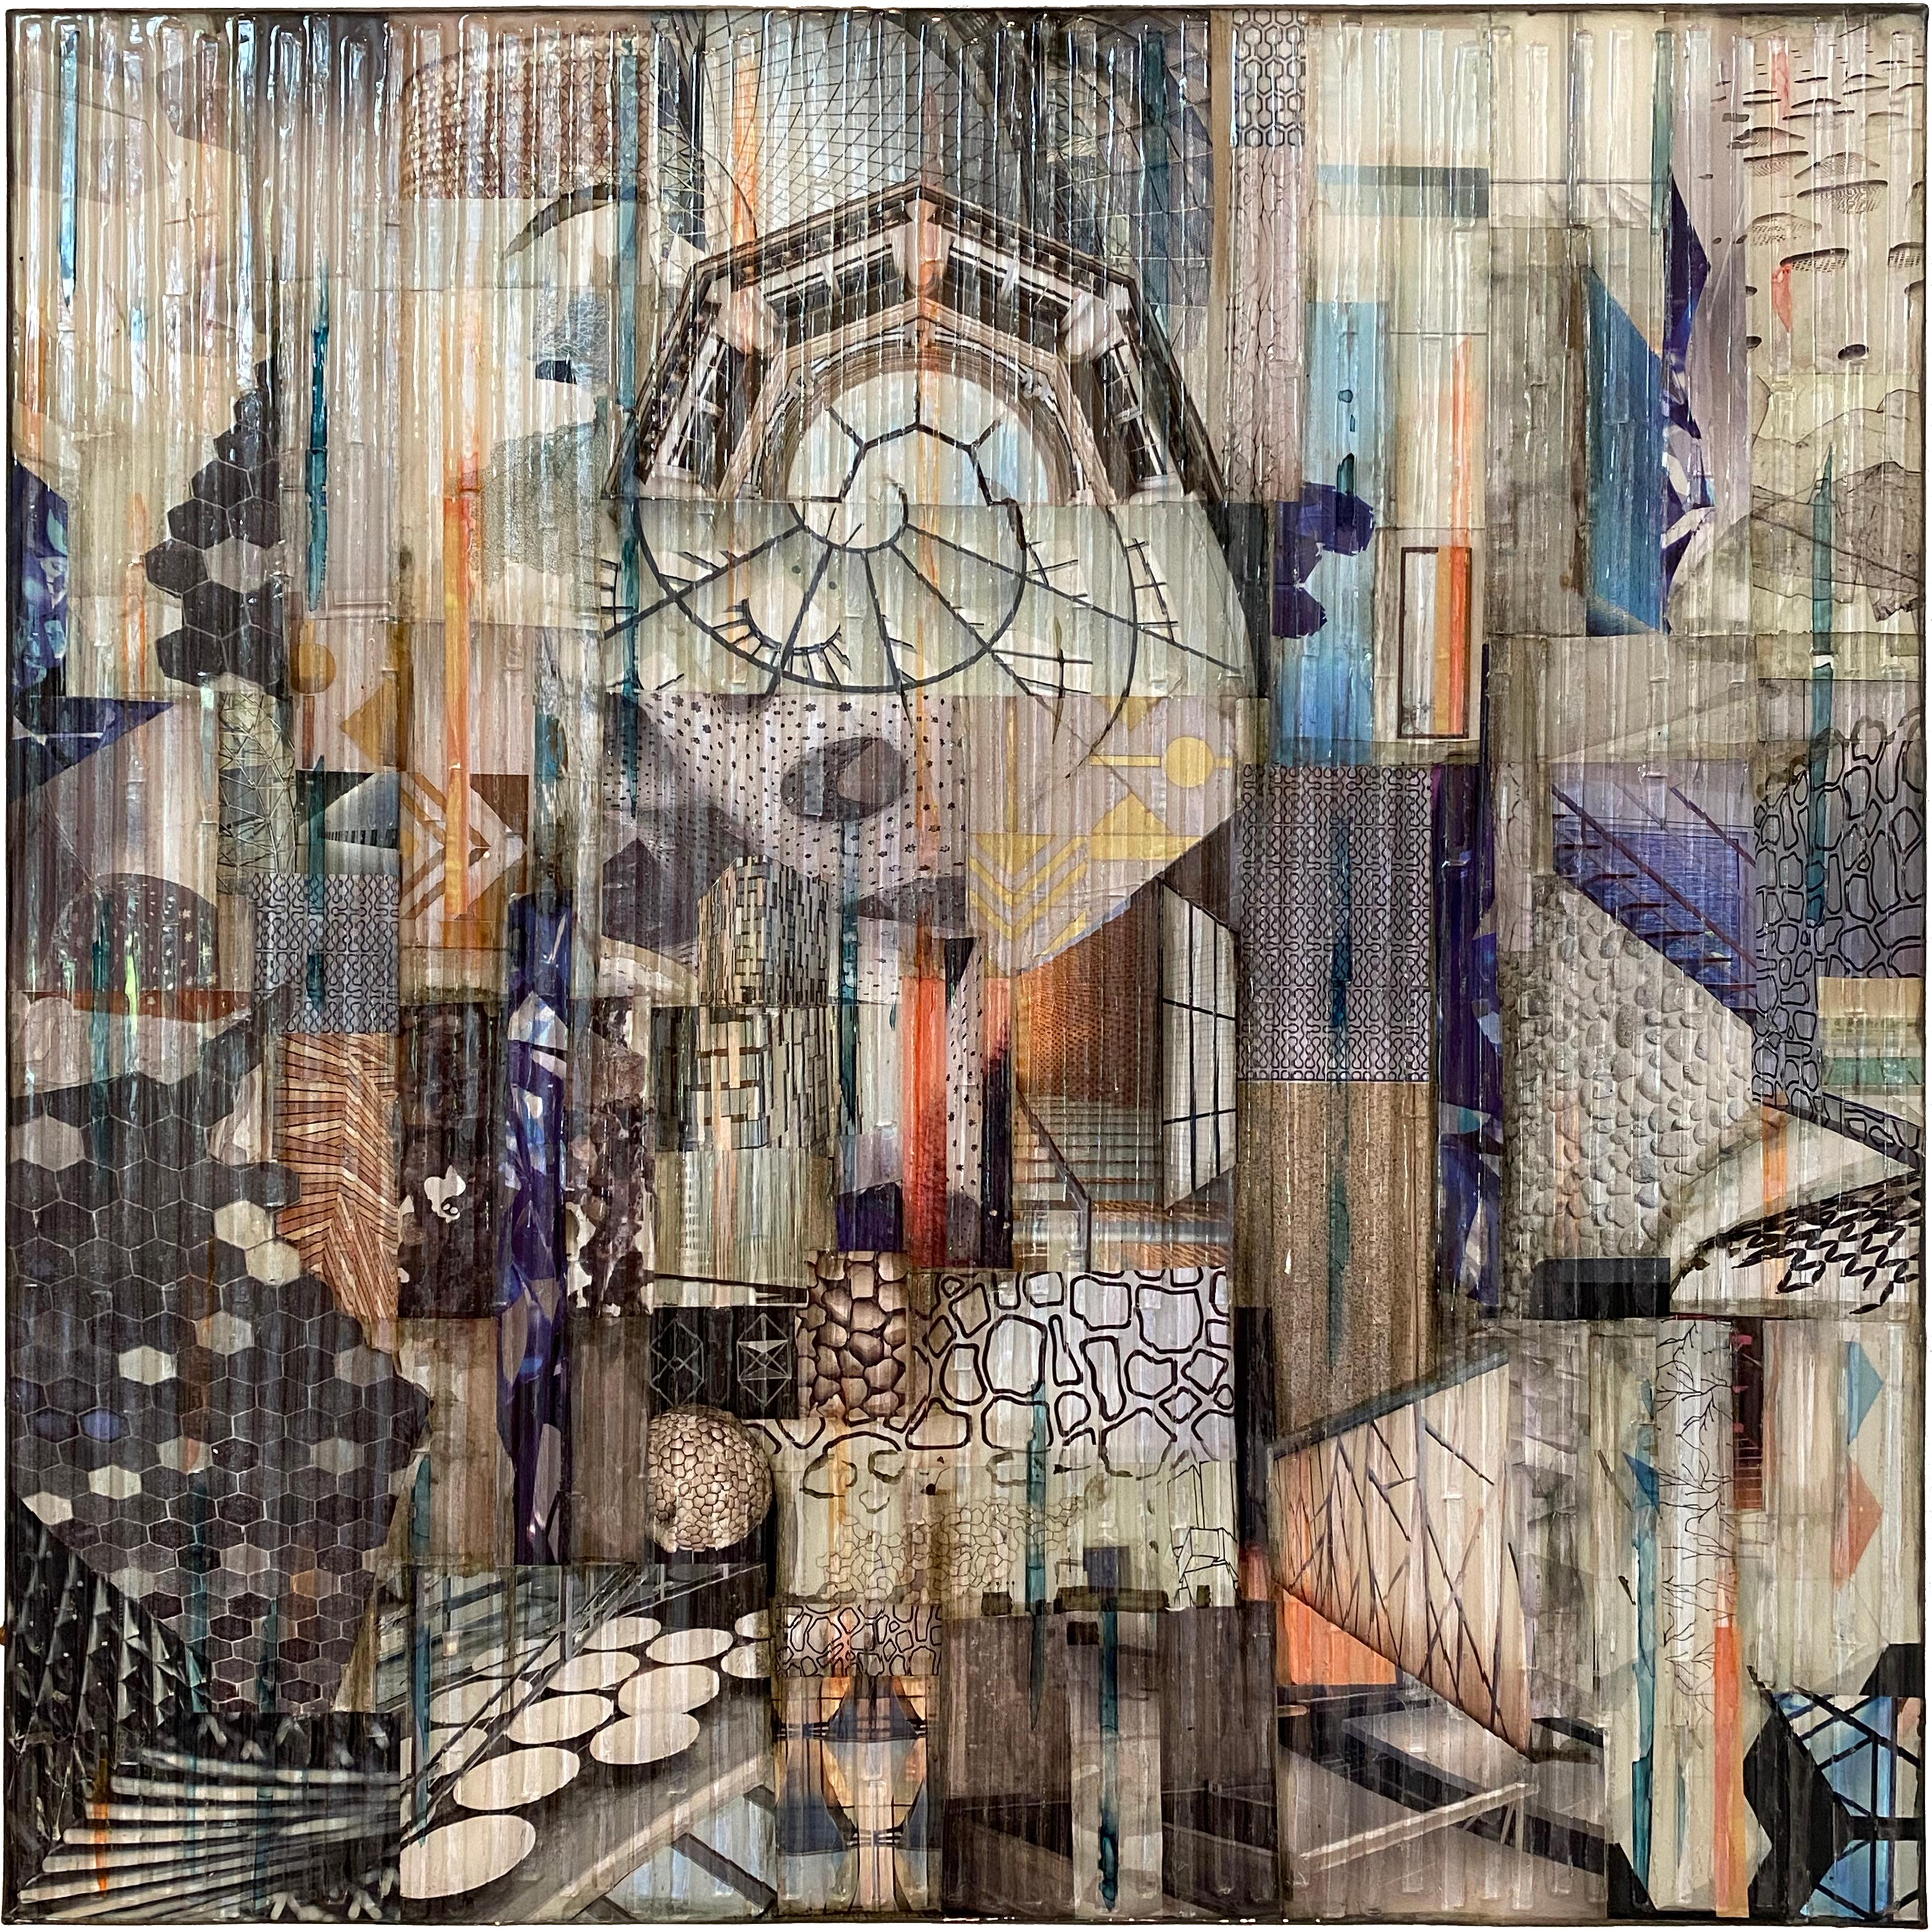 Code & Form is a mixed media piece consisting of two 24' x 24' panels. $3,450 per panel or $7,000 for the whole piece.
Madonna Phillip's  original art technique in glass and mixed media developed after studying with a master stained glass painter